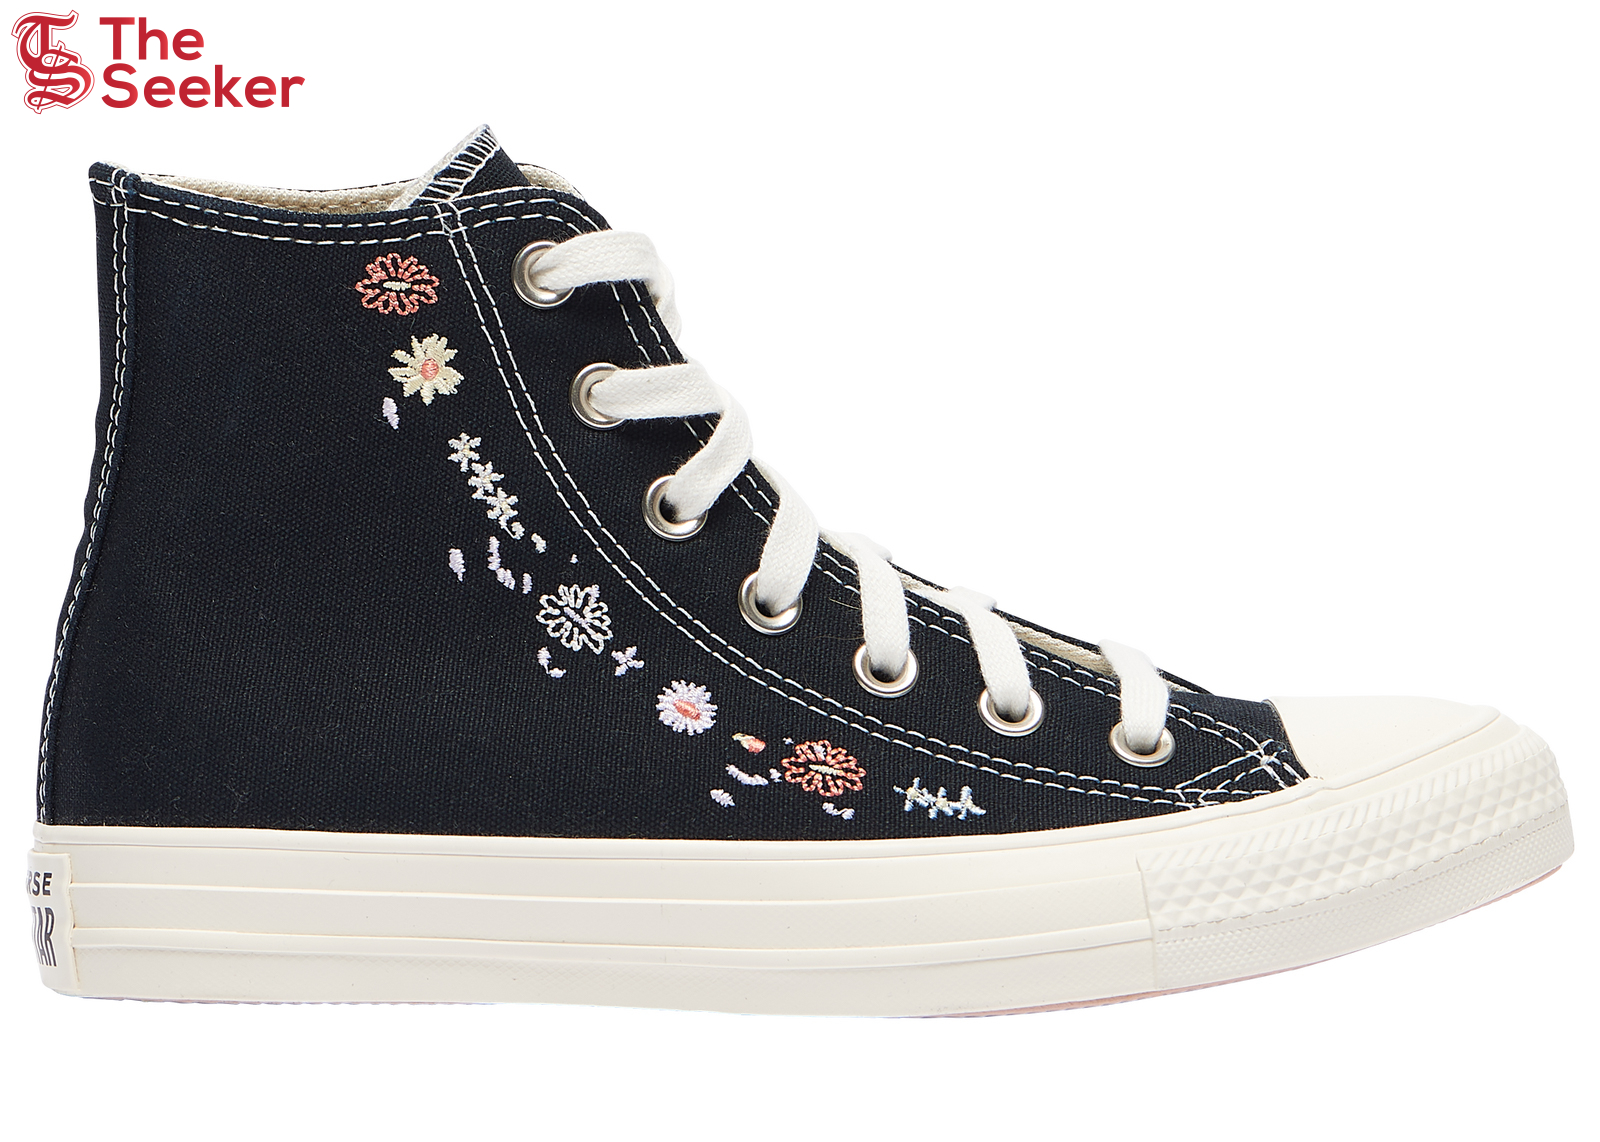 Converse Chuck Taylor All-Star Hi Embroidered Floral (Women's)